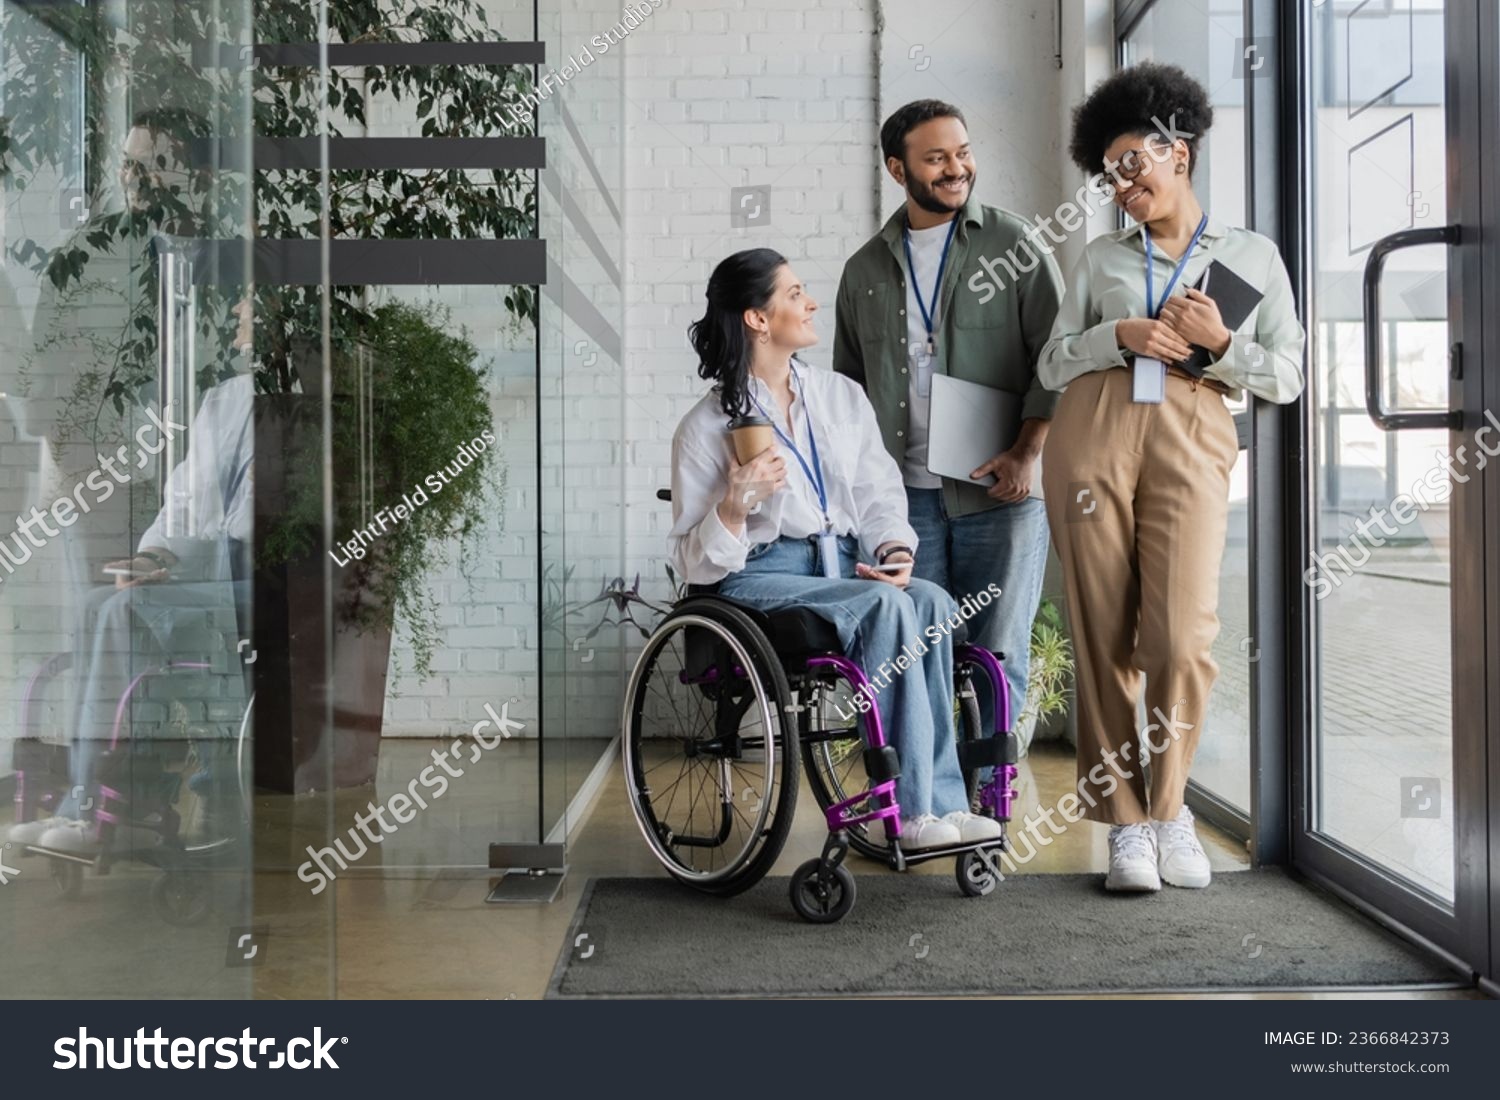 group shot of diverse business people, disabled woman on wheelchair chatting with colleagues #2366842373